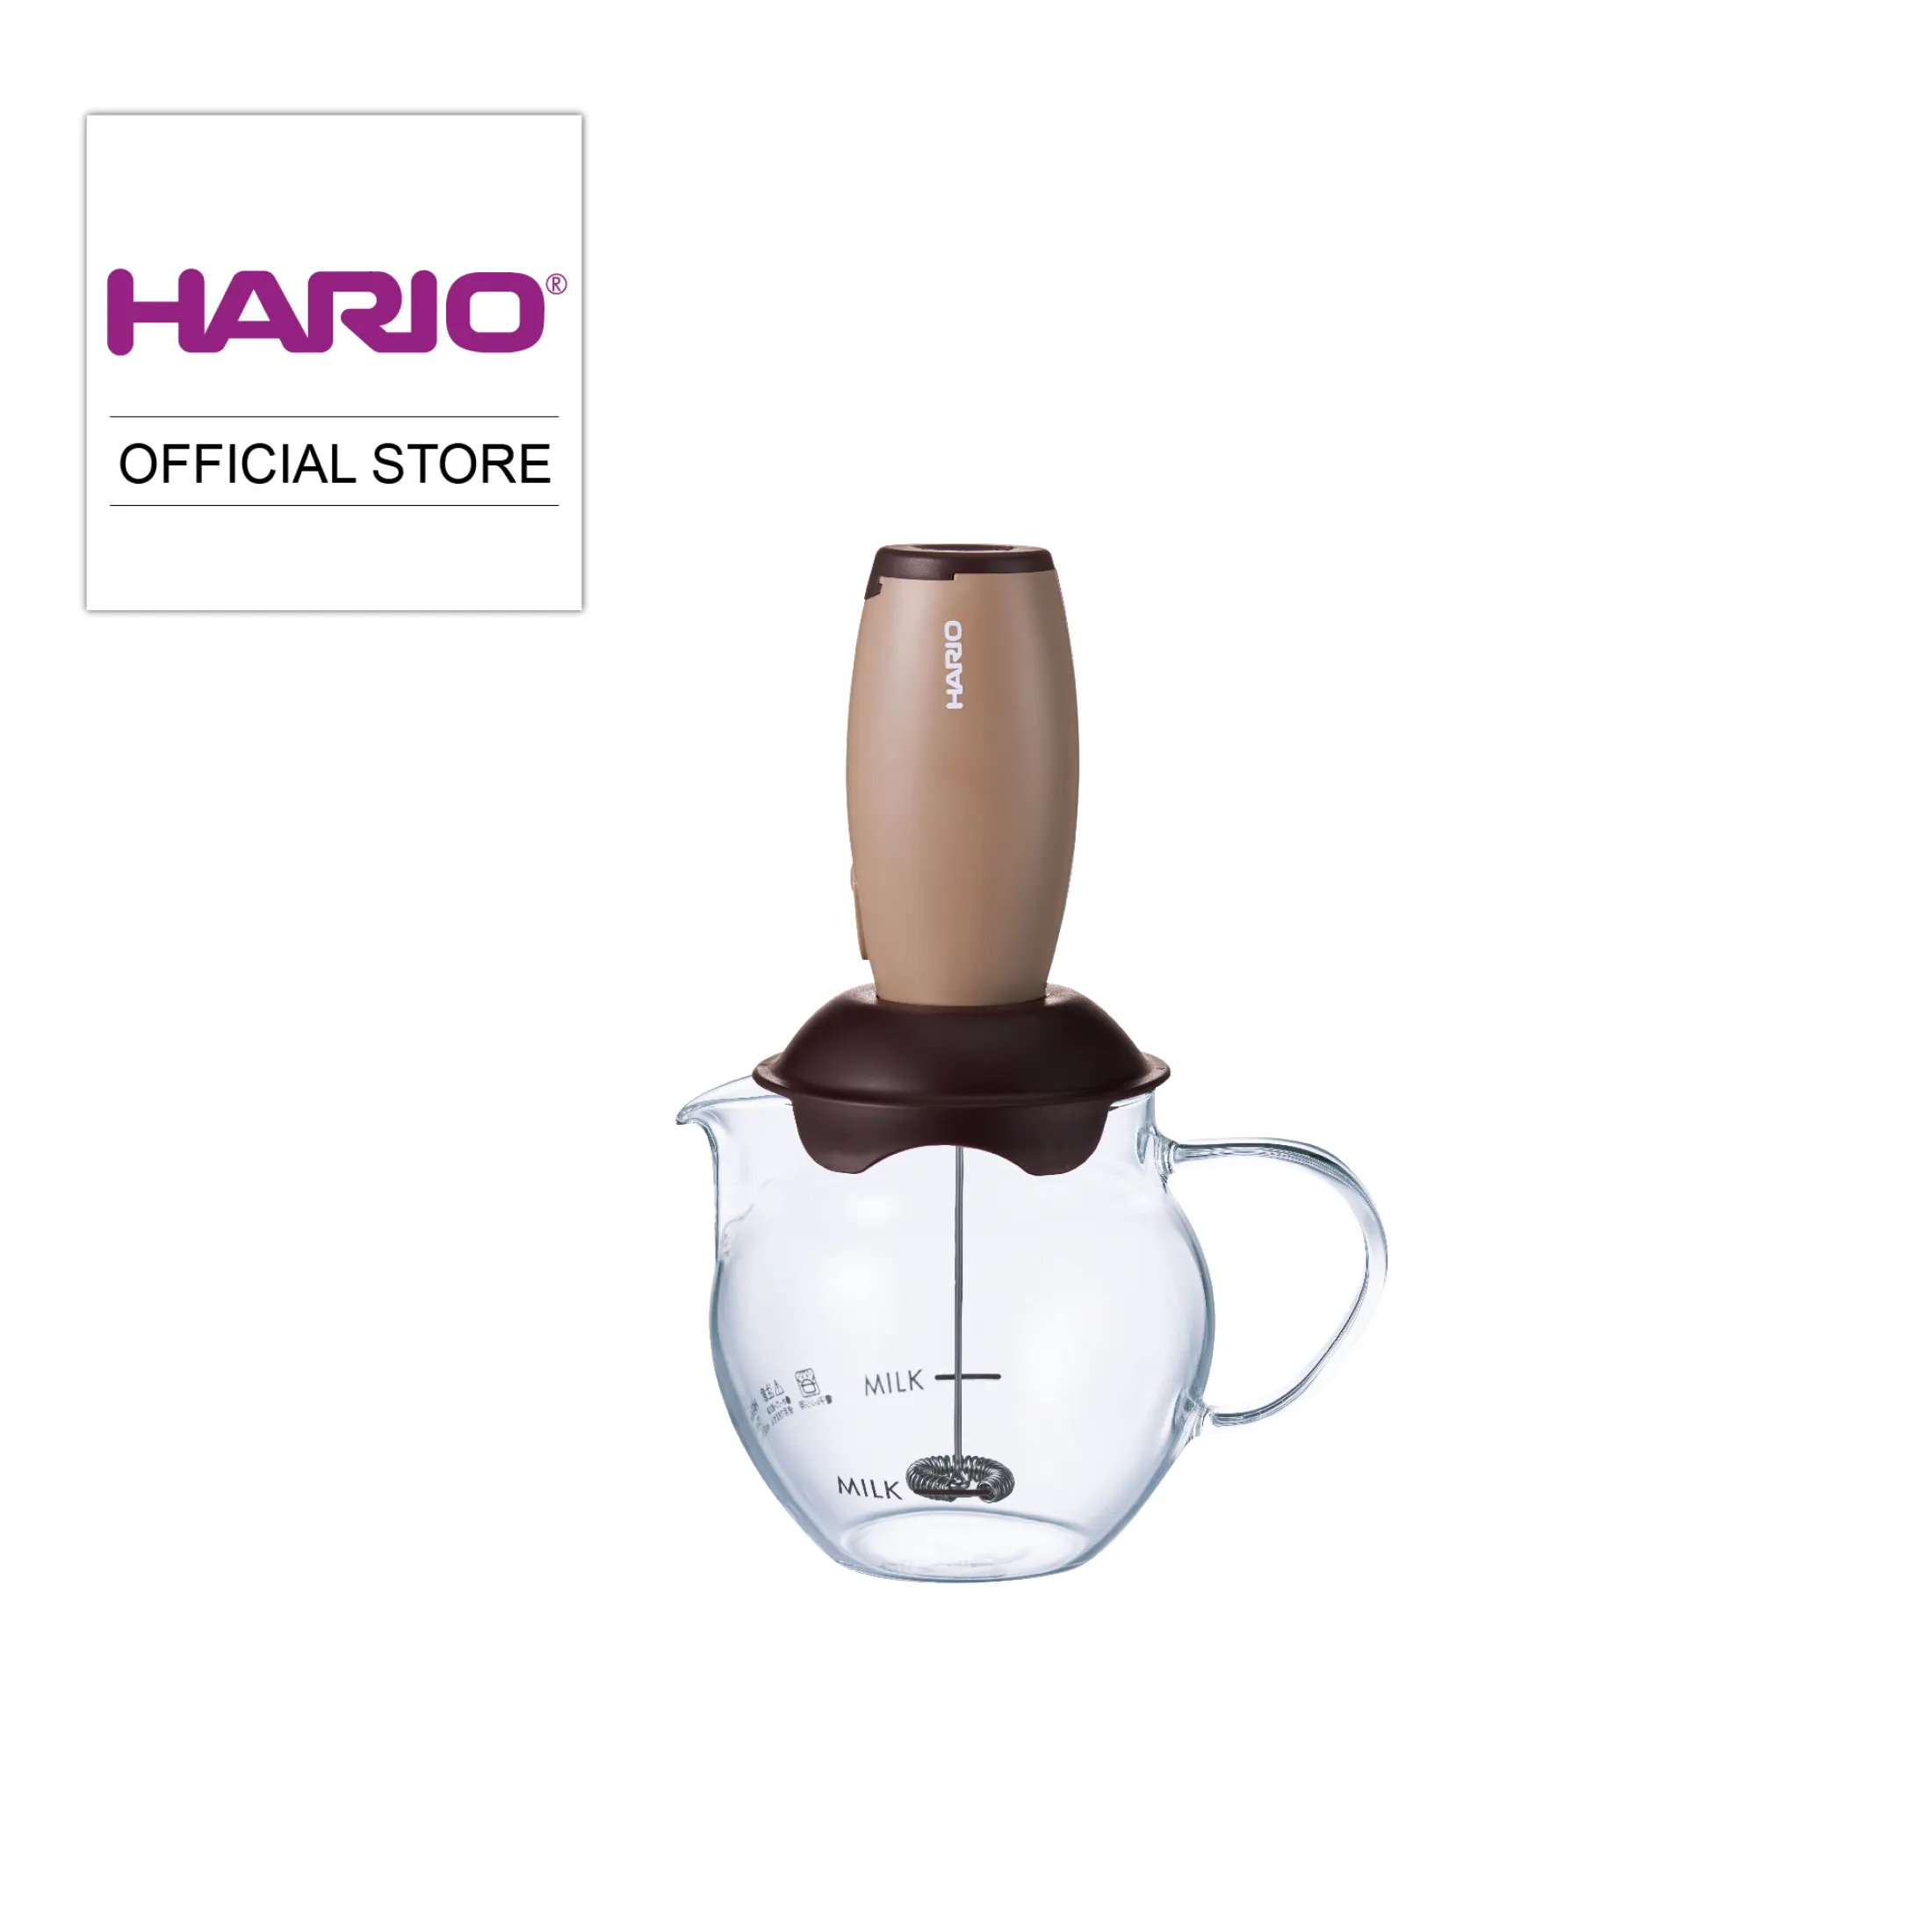 Hario Qto Creamer Electric Milk Frother With Glass Server Cqt 45 Lazada Singapore